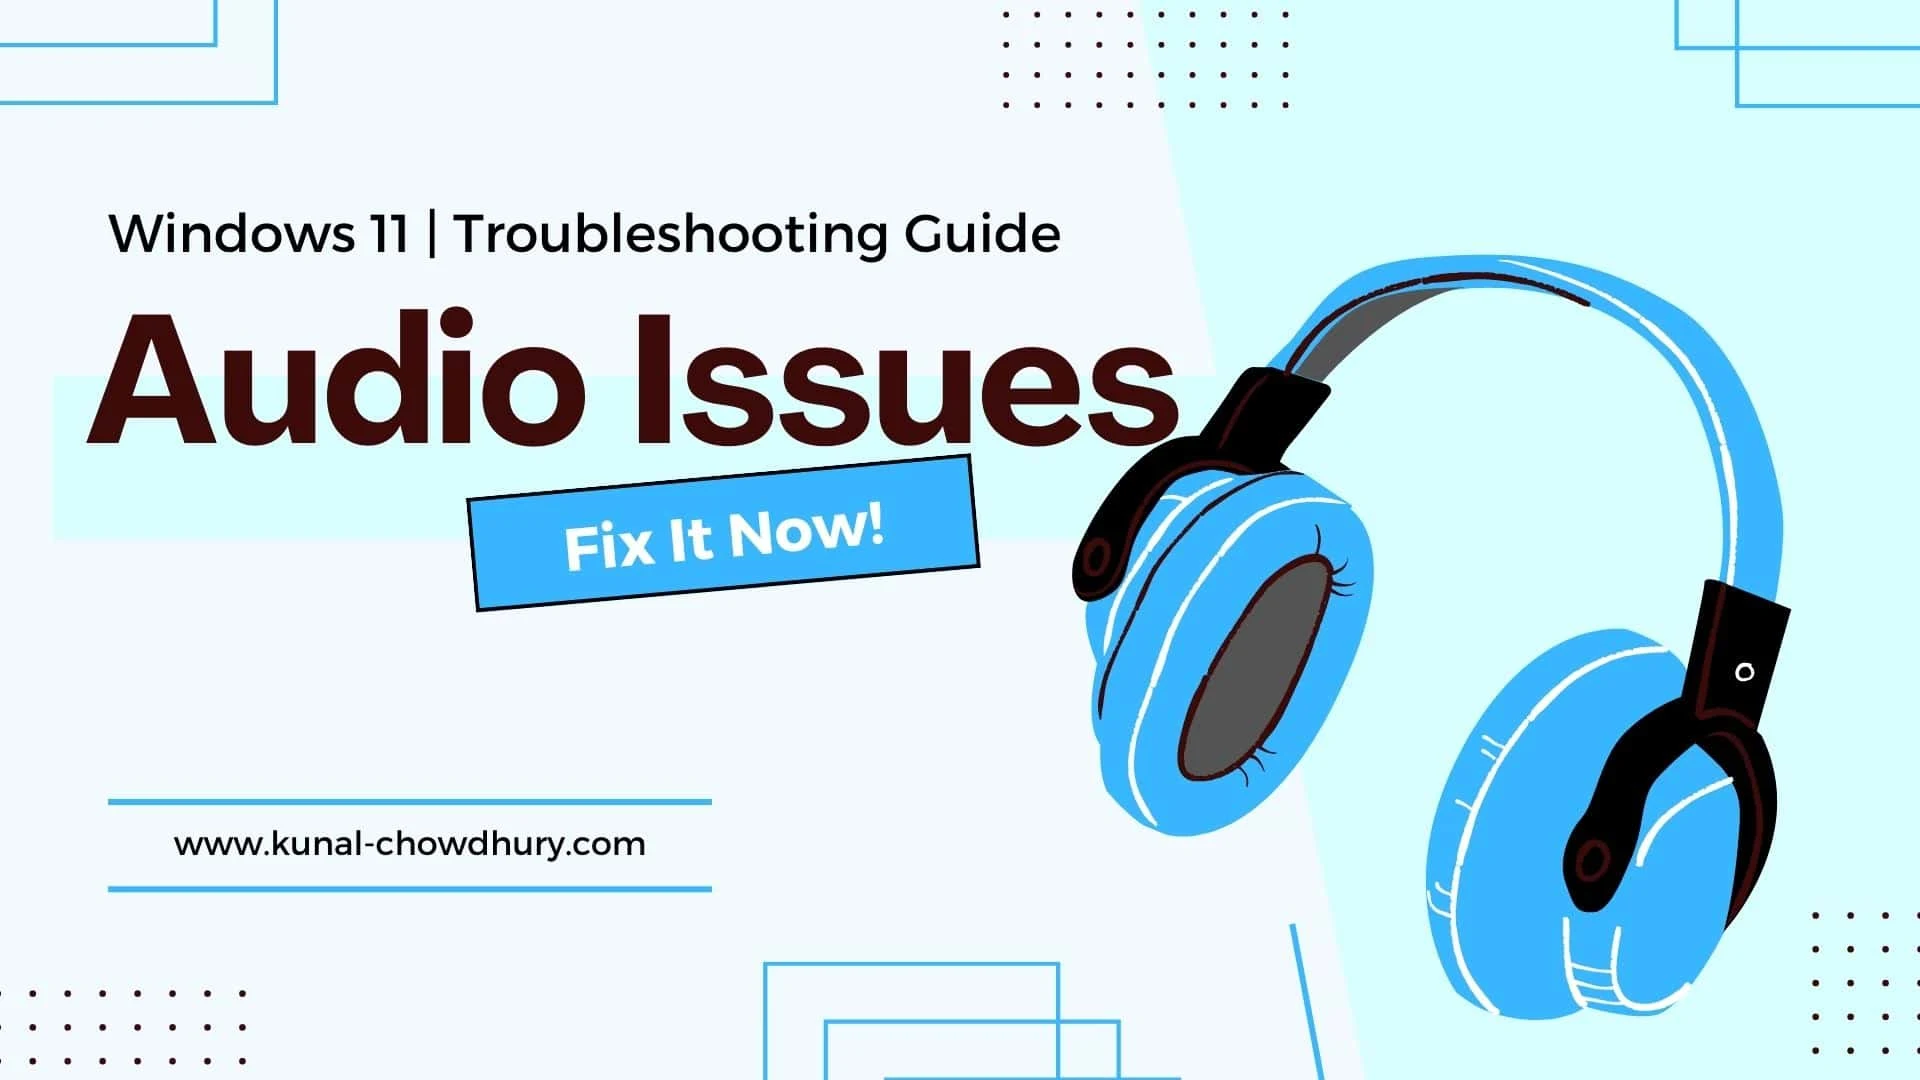 Windows 11 Sound Problems? Here's How to Troubleshoot and Solve Them